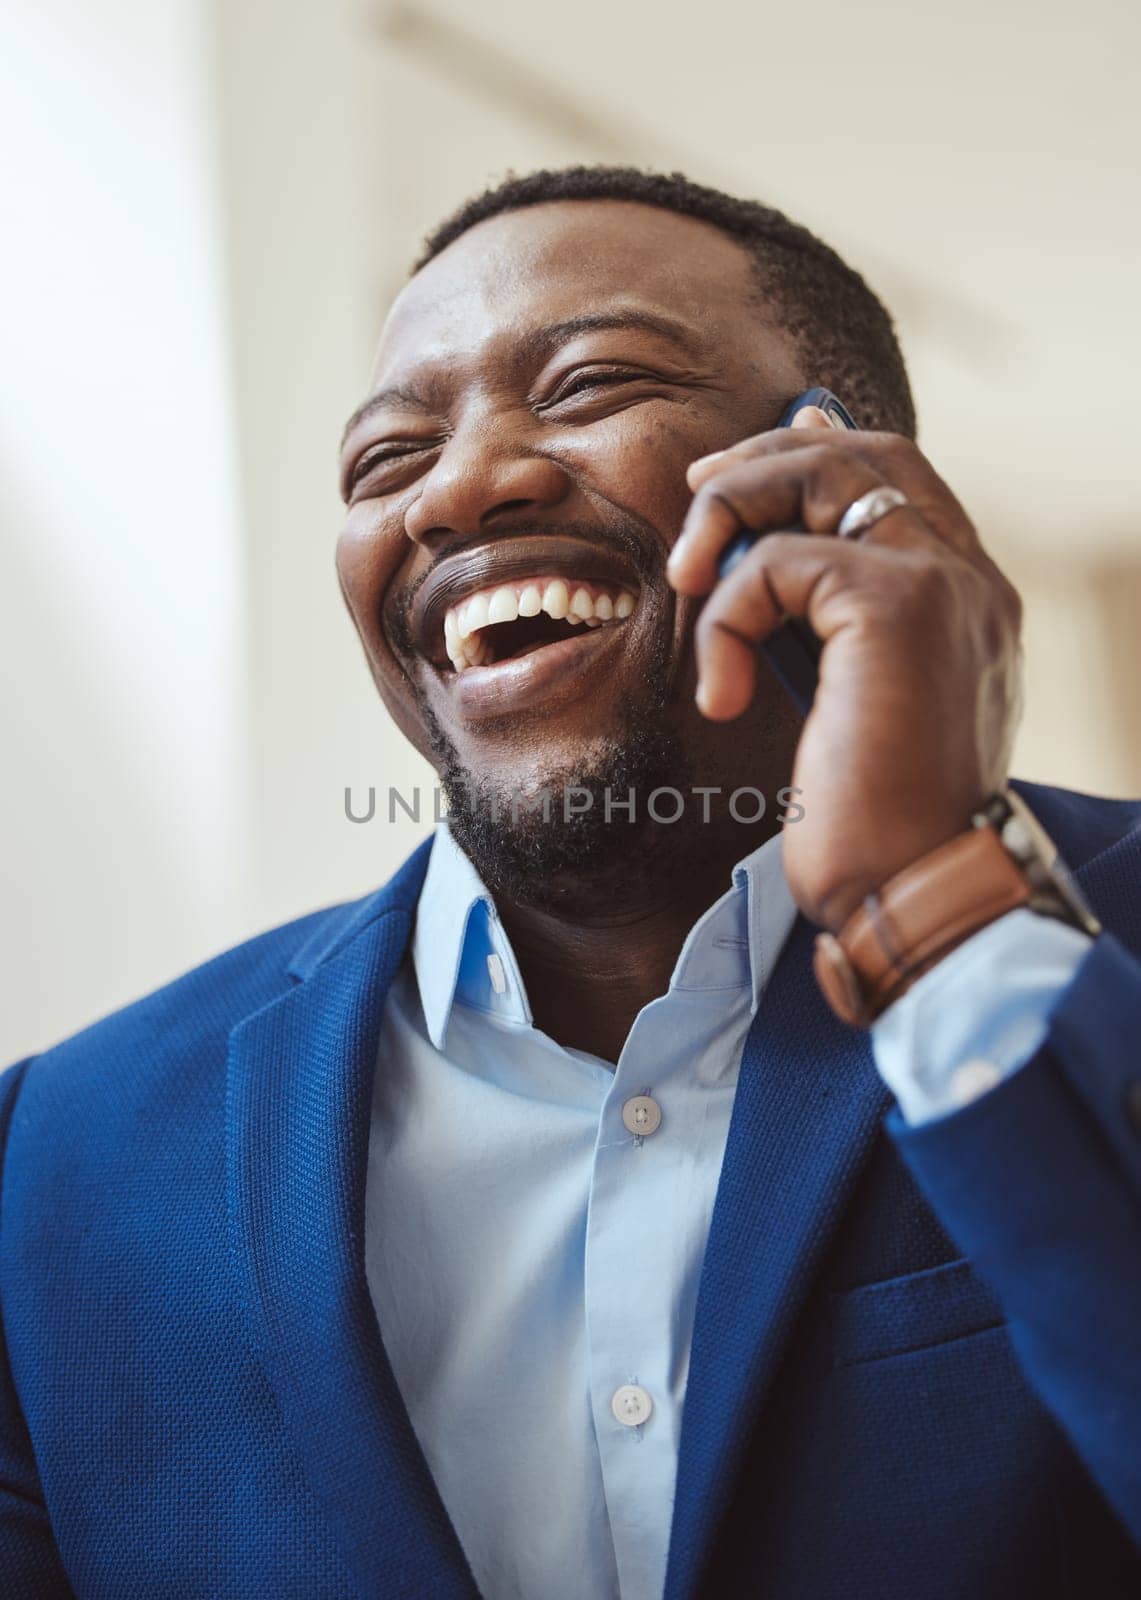 Phone call, communication and laughing with a business black man talking while working in corporate. Mobile, networking or management with a male CEO feeling happy while chatting on his smartphone.